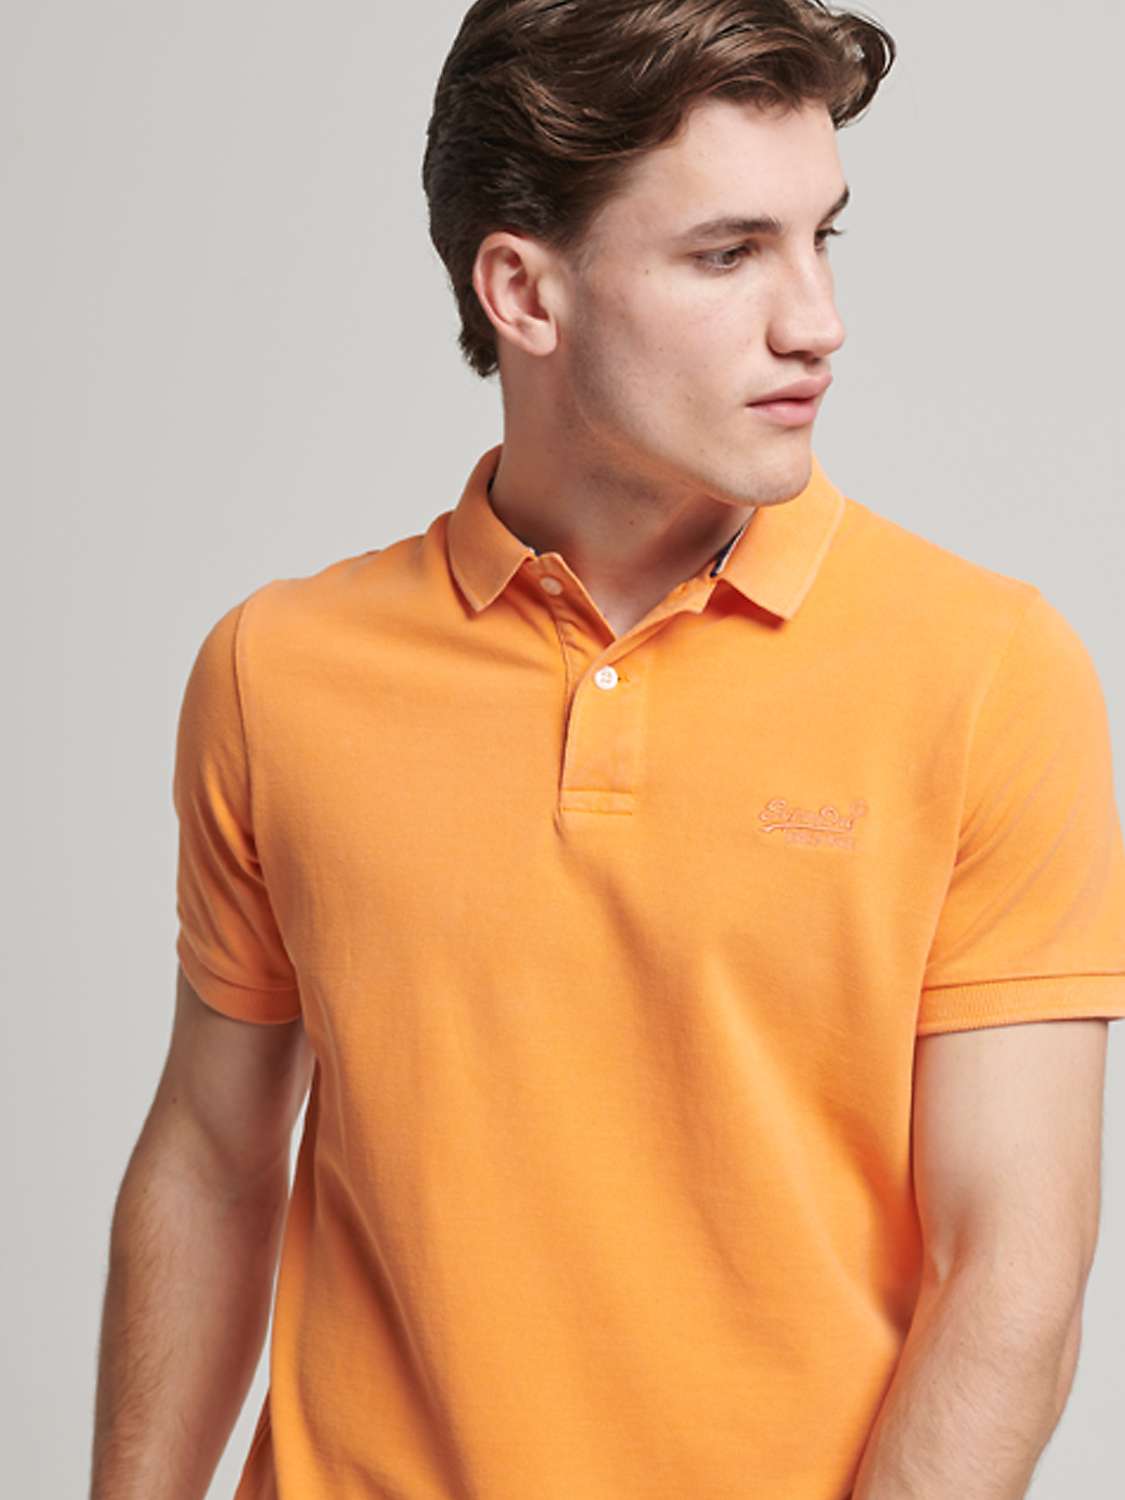 Buy Superdry Pique Polo Shirt Online at johnlewis.com